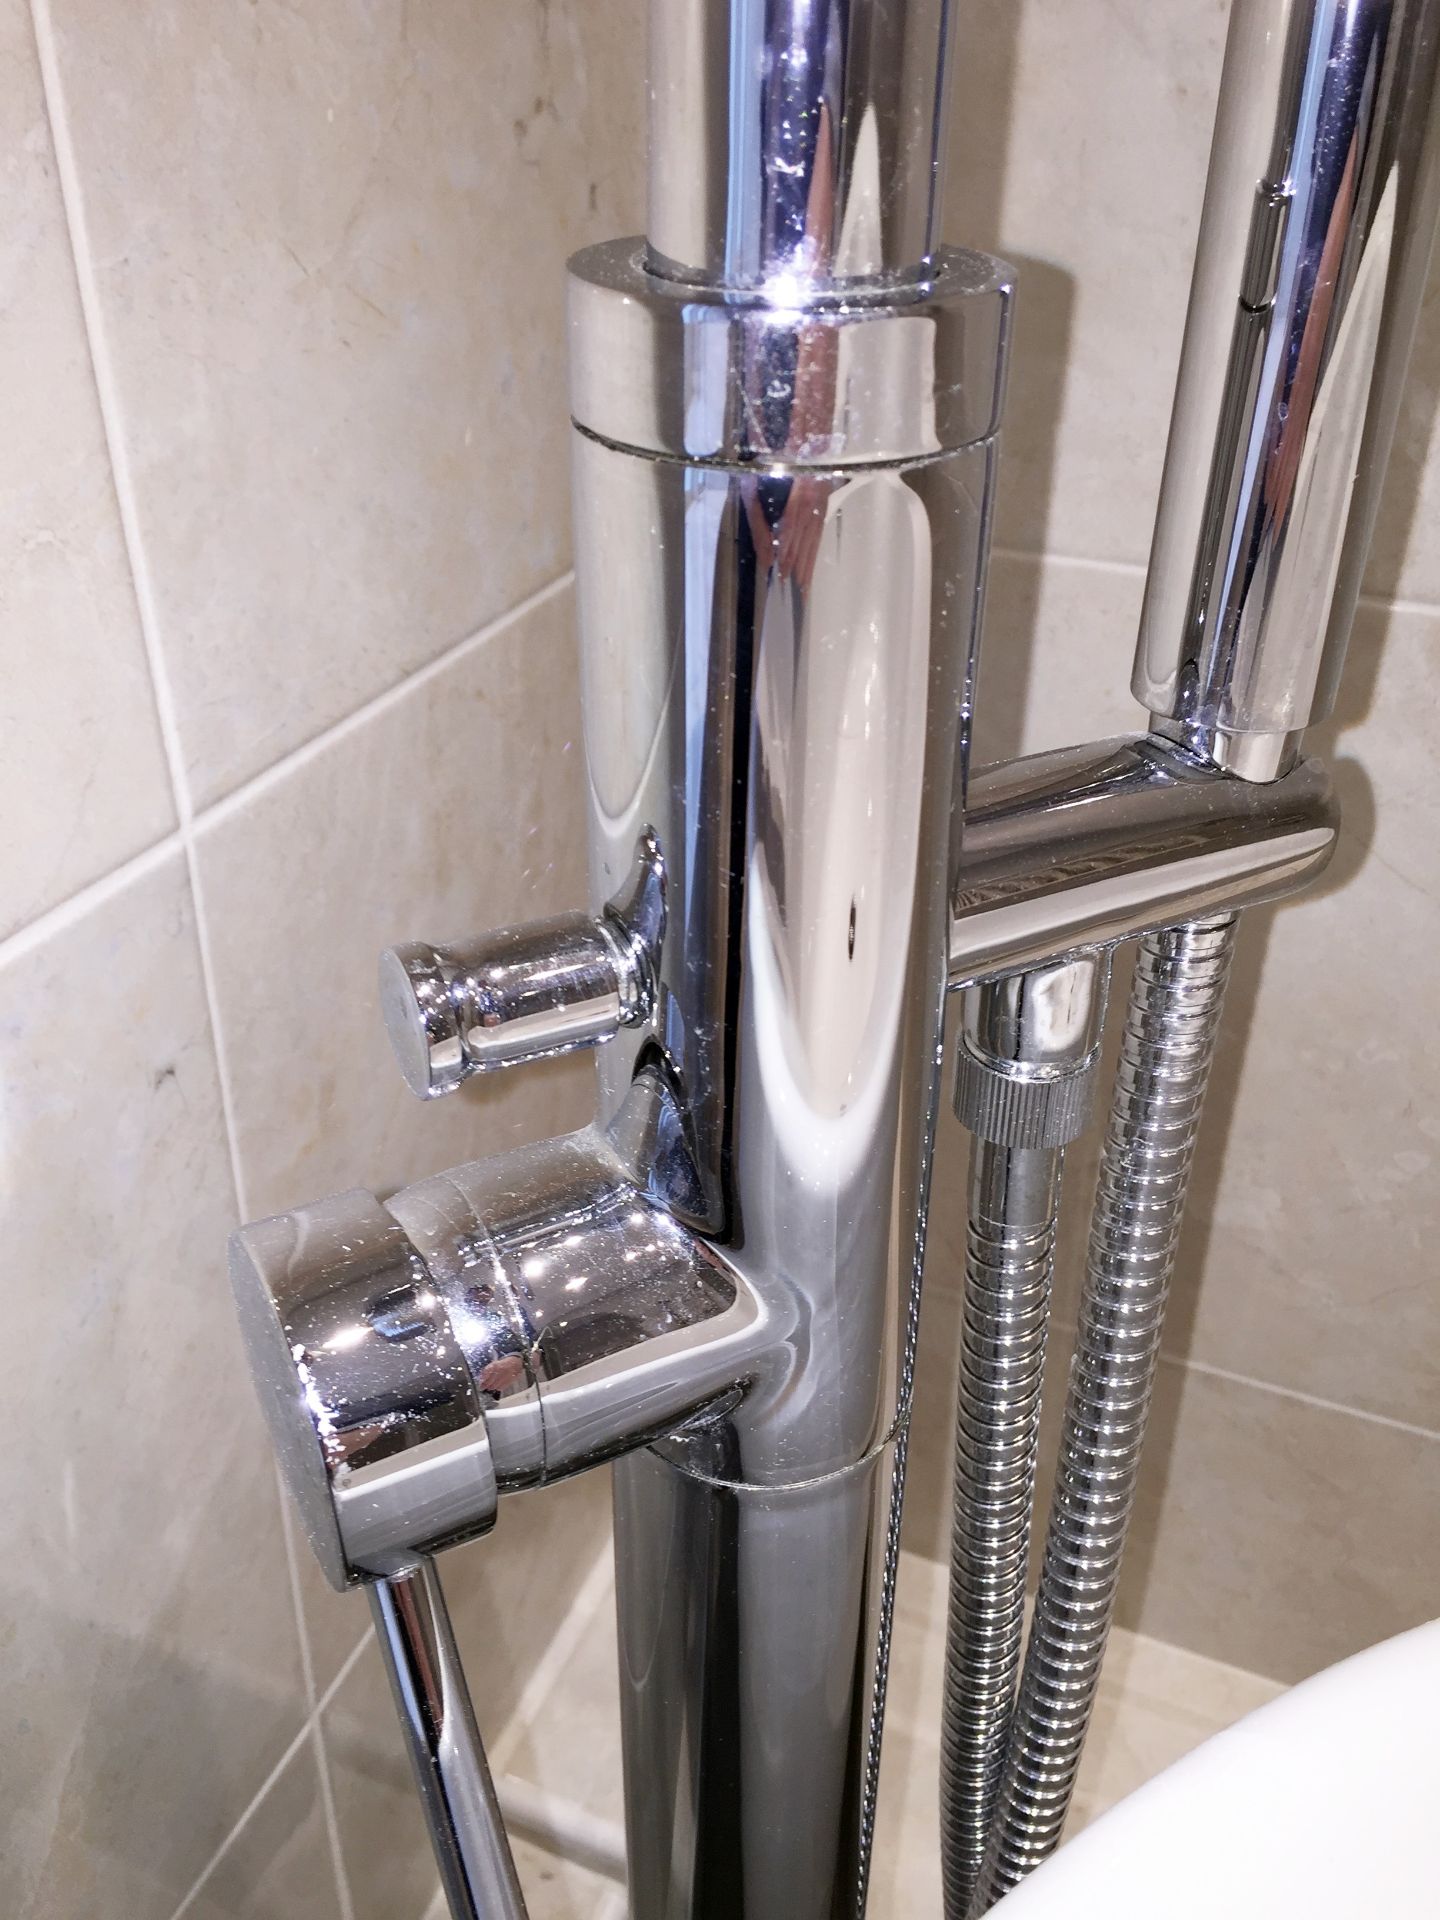 1 x Bath With A Floor Mounted Bath Filler Tap - Preowned In Good Condition - More Information To - Image 8 of 8